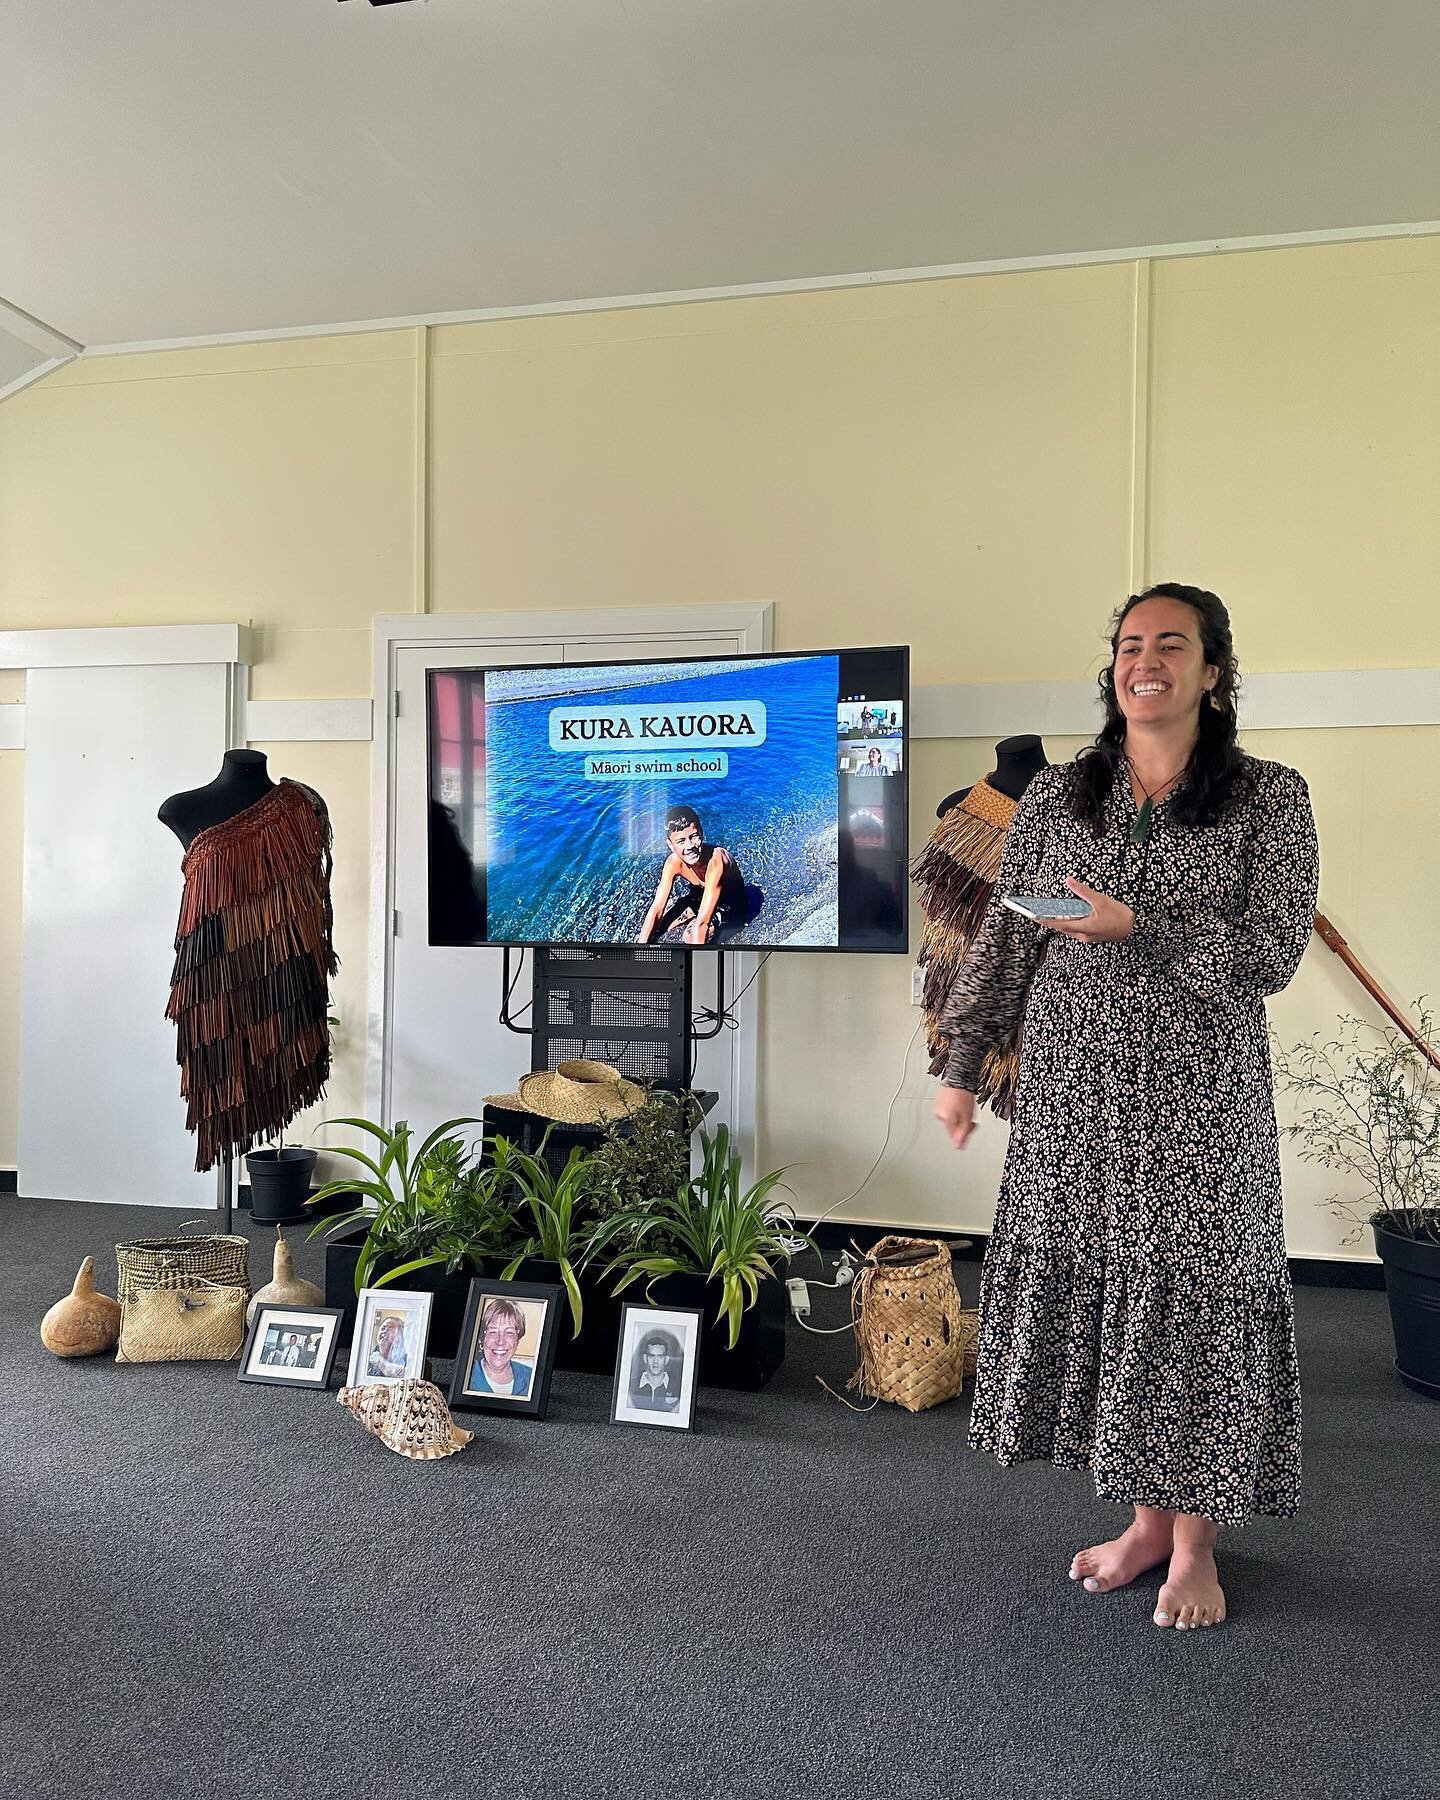 Kauora - ki Te Pou o Tainui 

Reflecting on the successful defence of her PhD thesis - Kauora: A theory and praxis of swimming for Māori, this time last week. Our kauora lead Terina Raureti has written a blog about the experience of her and her whāna